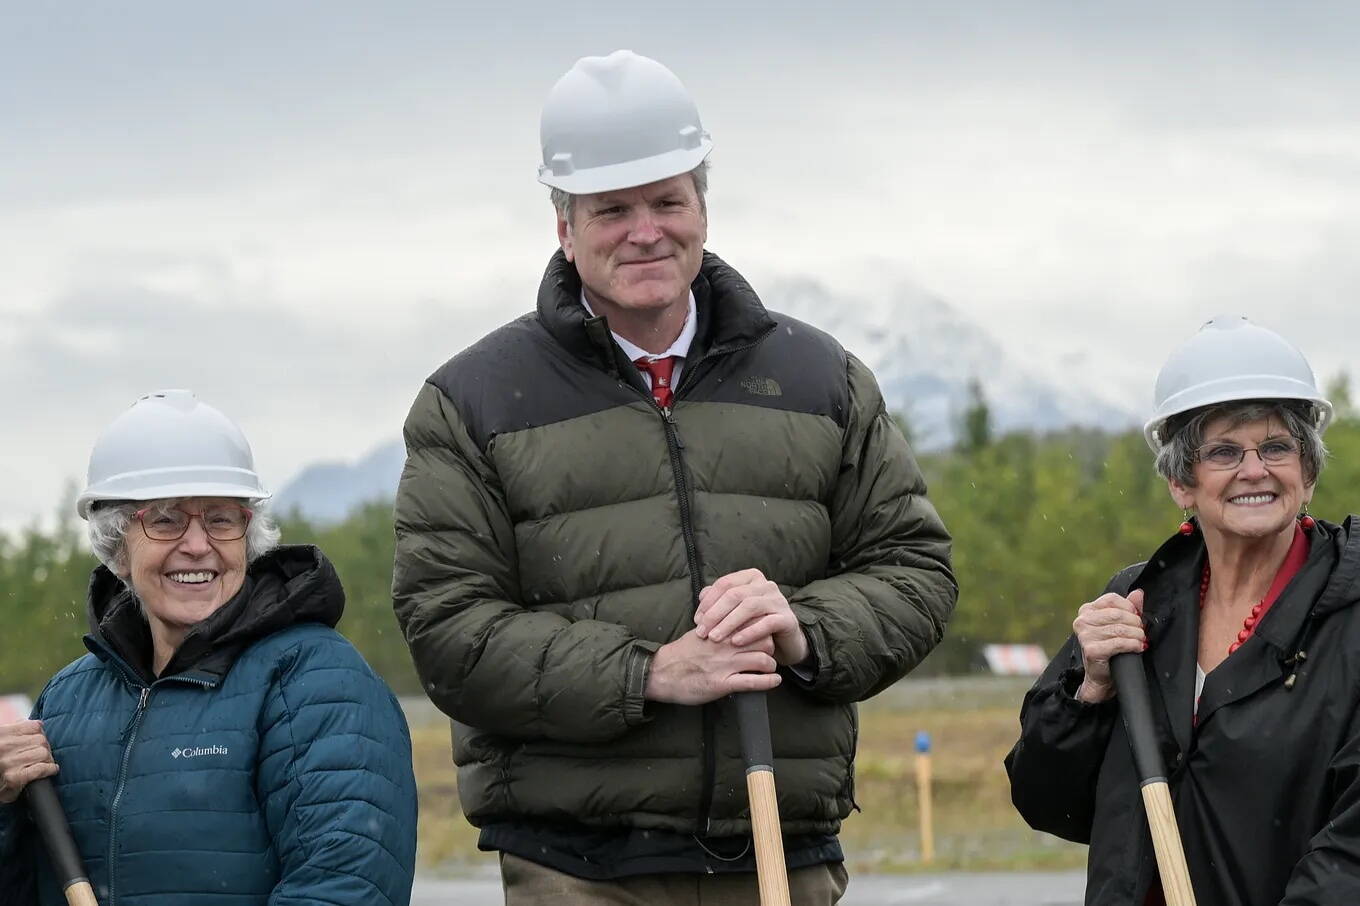 Gov. Mike Dunleavy poses for a photo at the groundbreaking of the Wasilla airport’s expansion. (Office of the Governor)